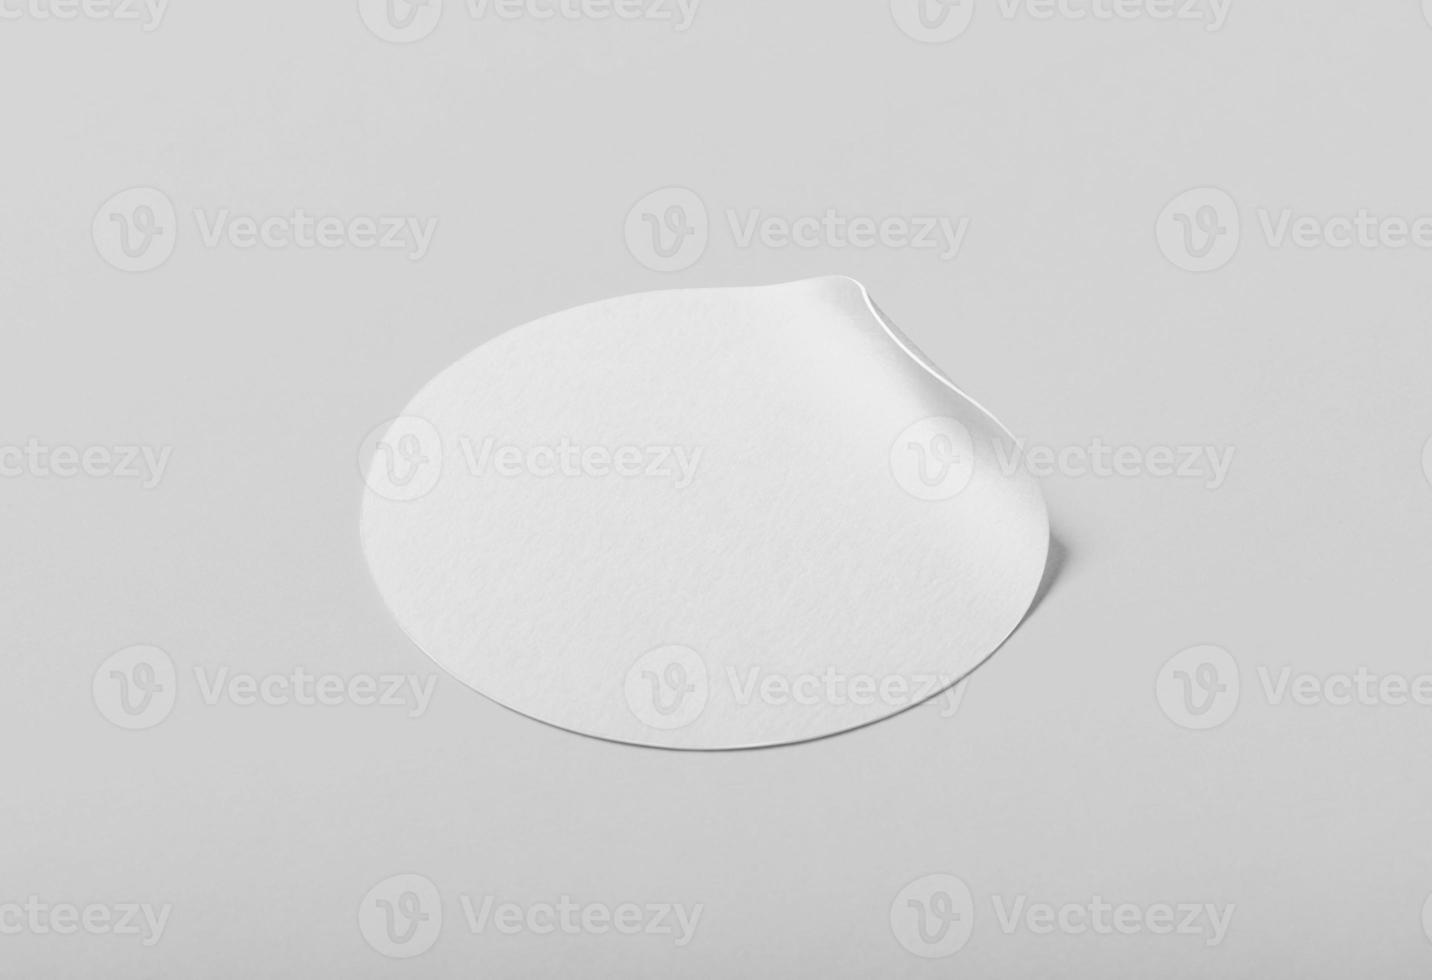 Rounded sticker mockup template with copy space for your logo or graphic design photo